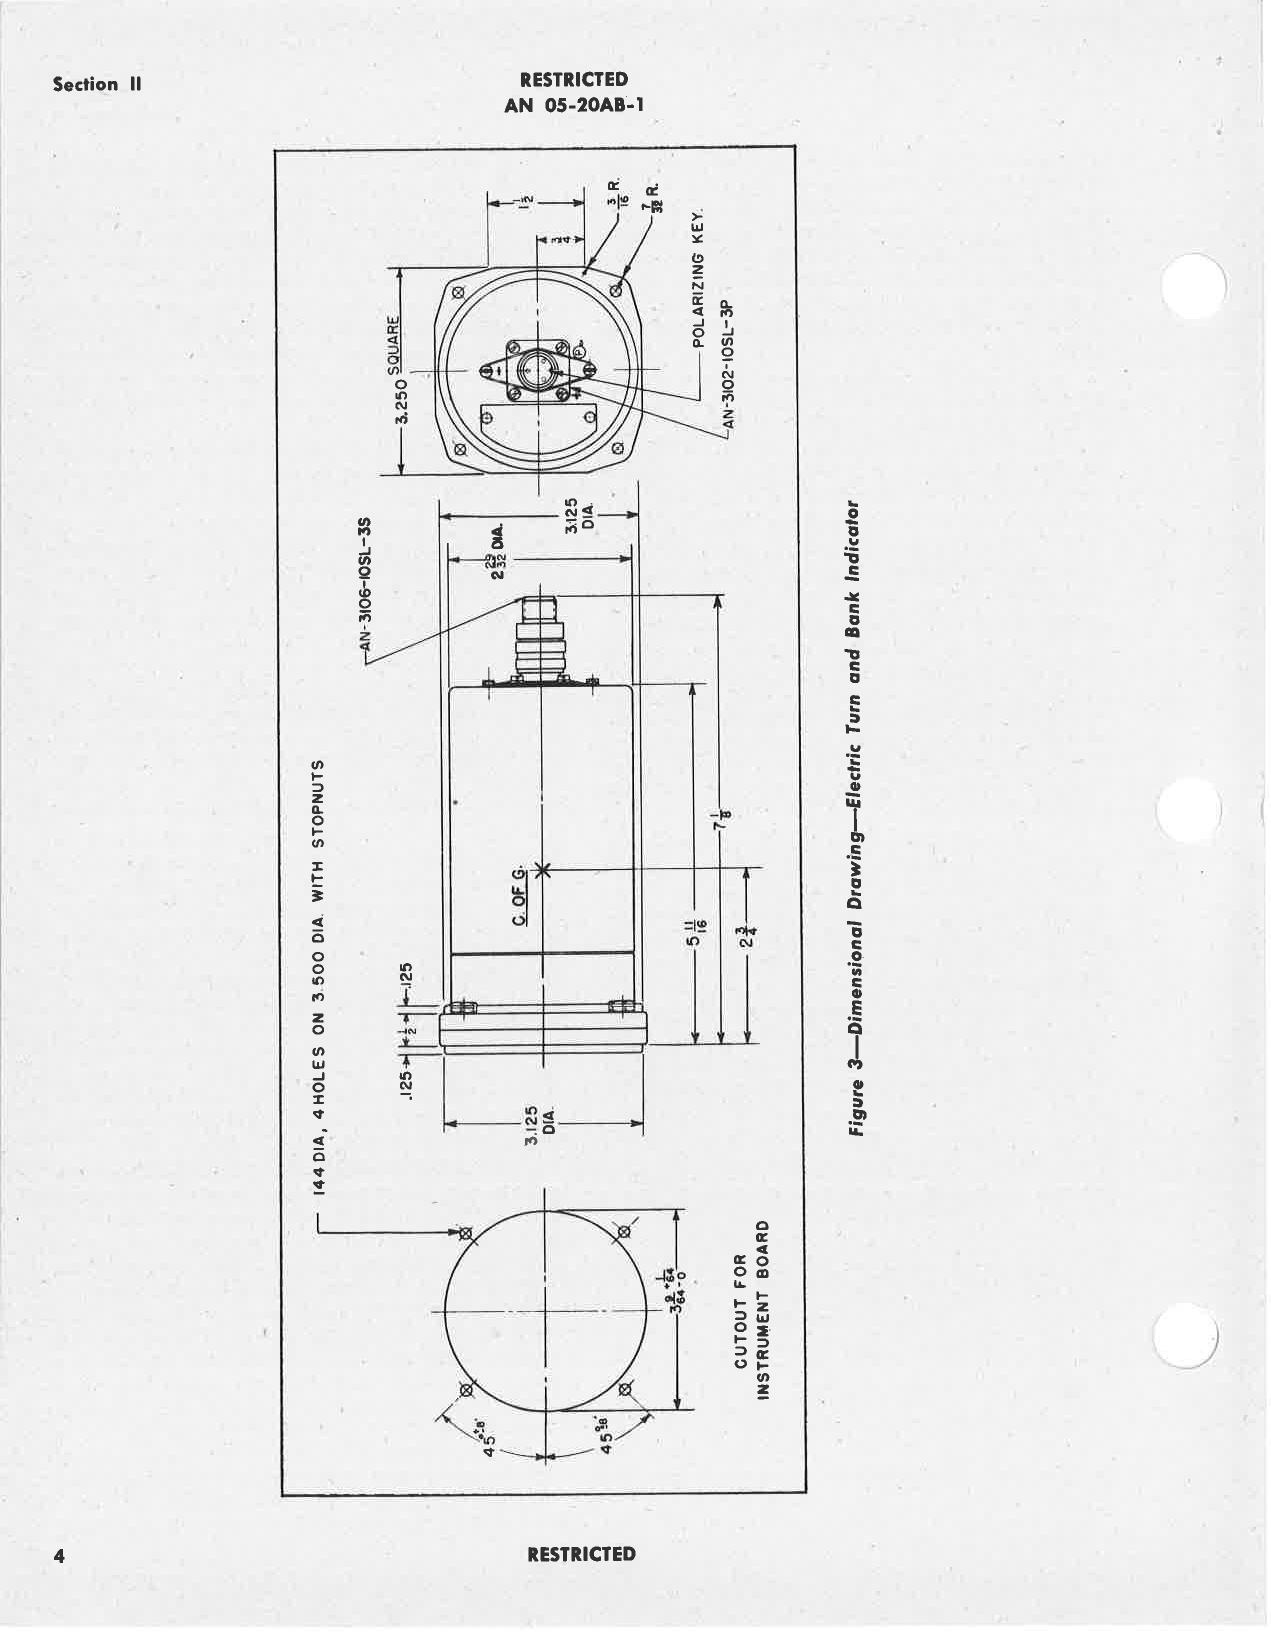 Sample page 8 from AirCorps Library document: Handbook of Instructions with Parts Catalog for C-1 Turn and Bank Indicator